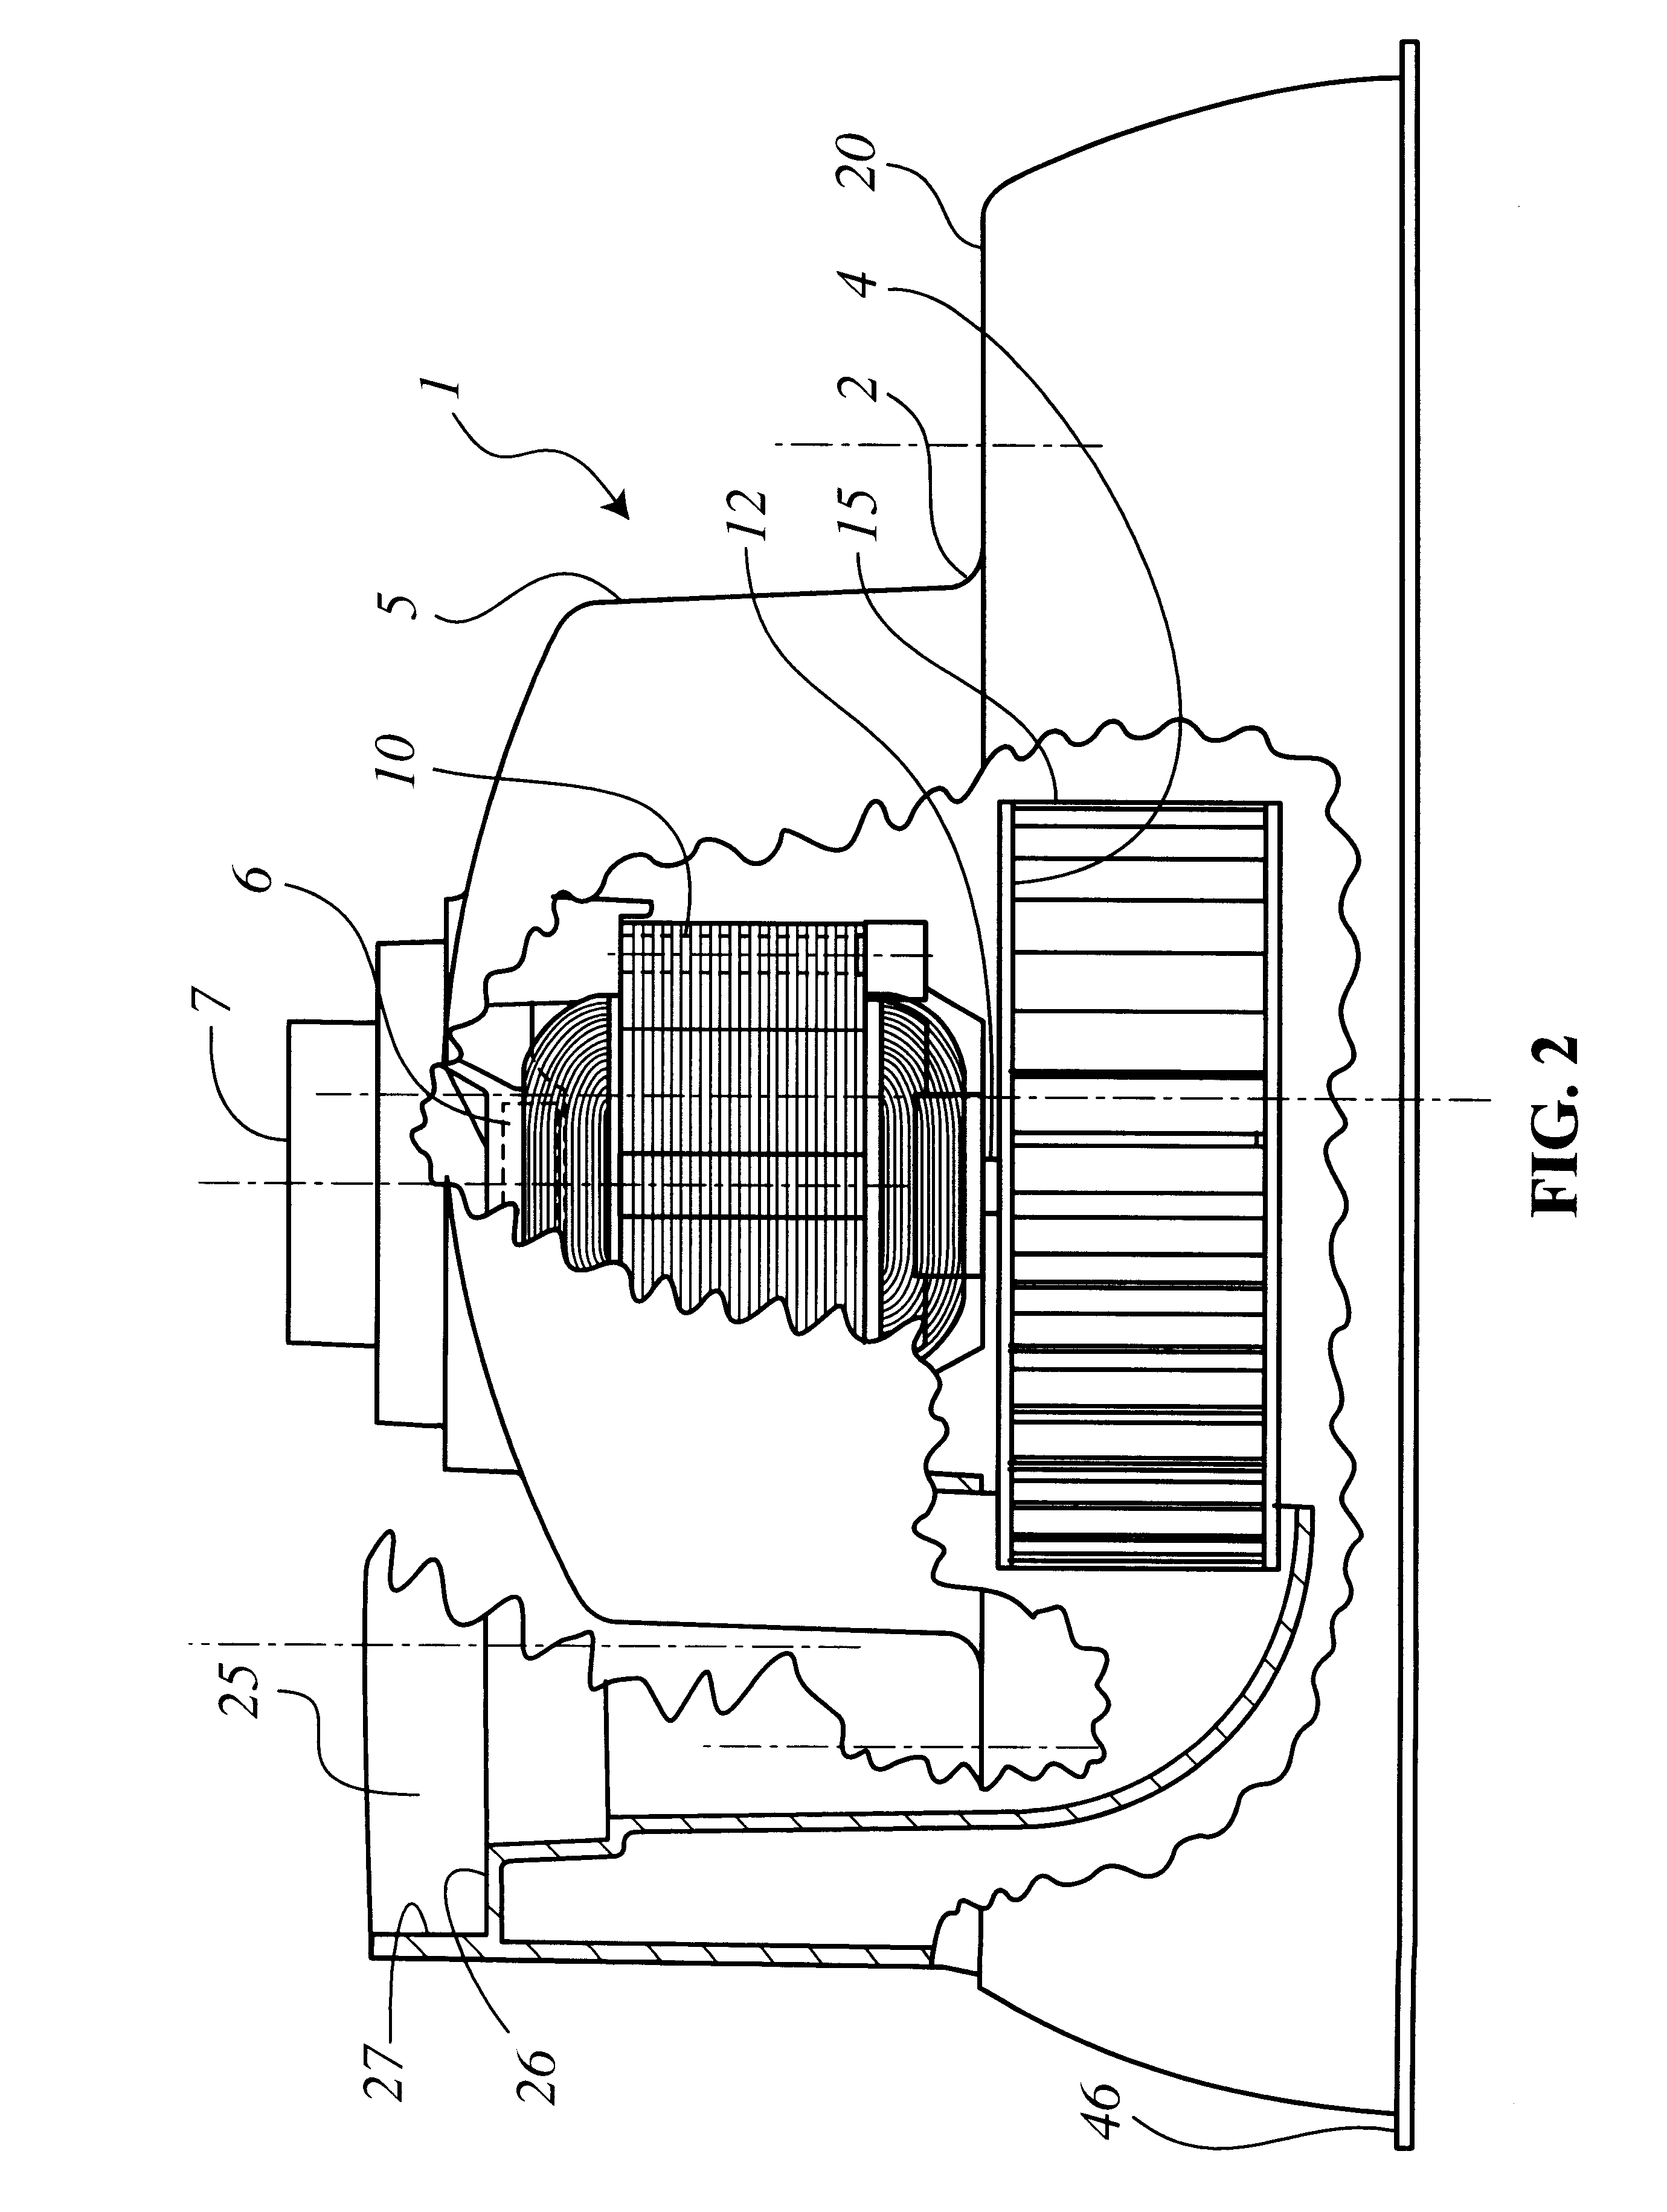 Method and apparatus for providing dilution air to a blower motor